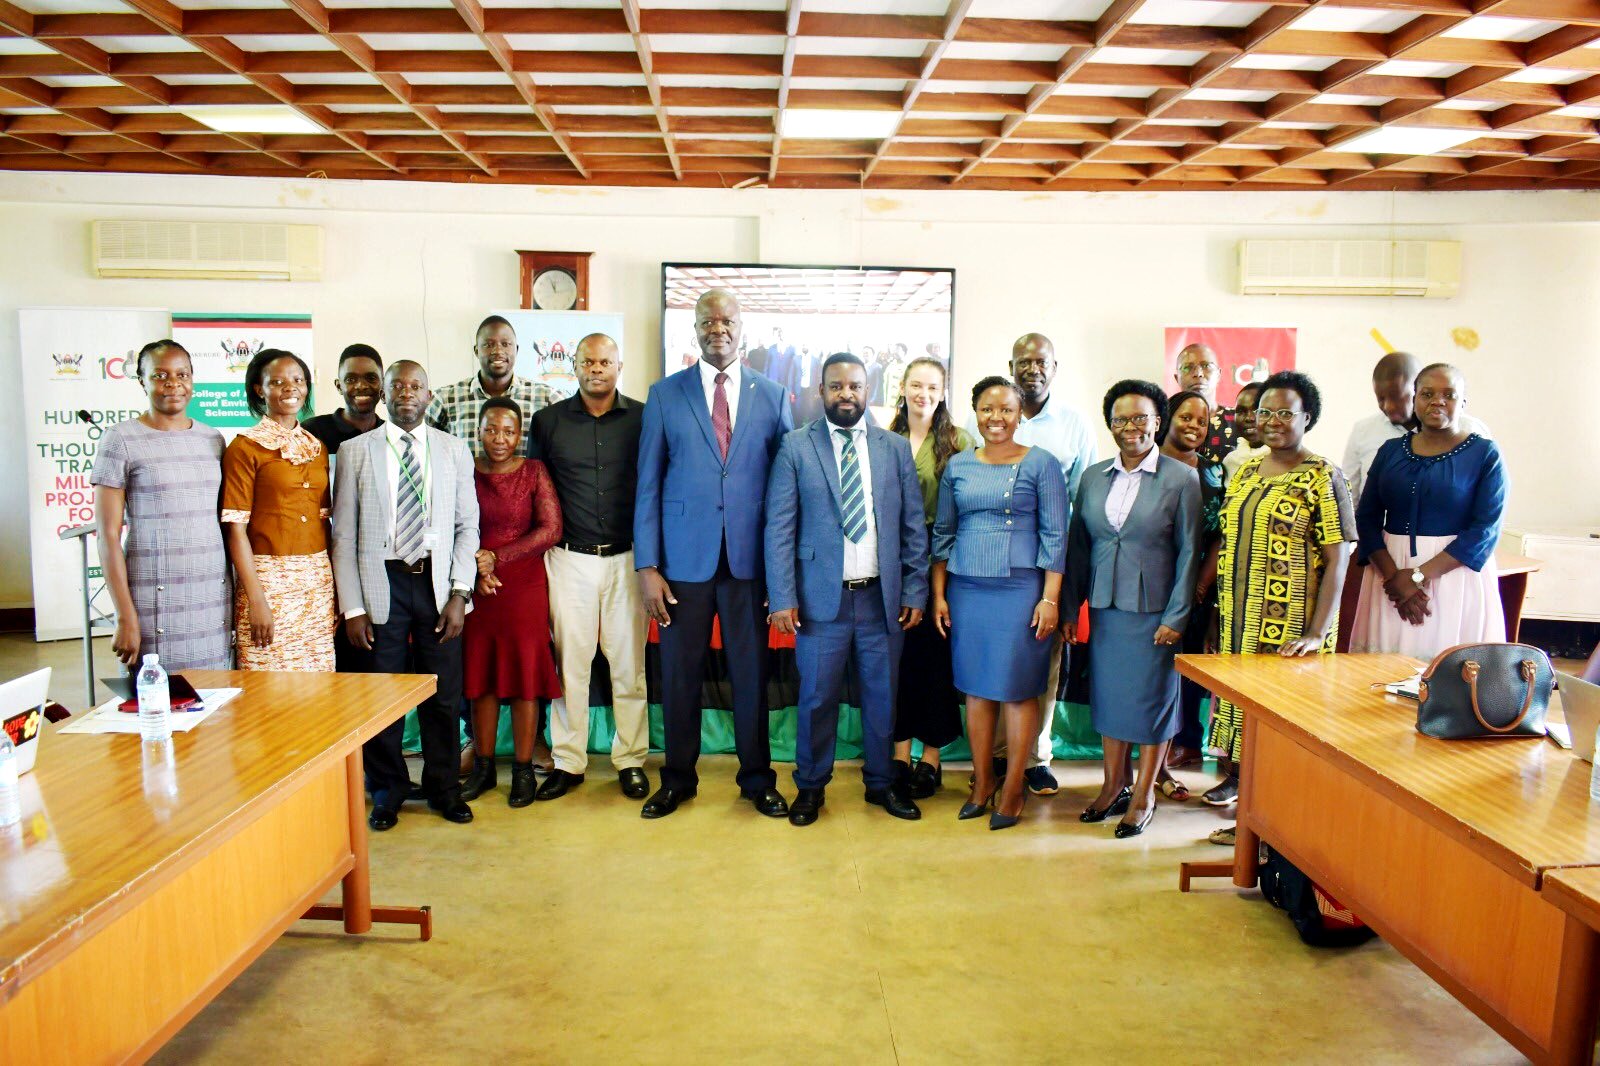 Front Row: Assoc. Prof. Robert Wamala (4th R) who represented the Vice Chancellor, Prof. Barnabas Nawangwe, Mak Team Lead-Prof. John Tabuti (5th R), Head GAMSU, Prof. Sylvia Nannyonga-Tamuusza (2nd R), HSRW Team Lead-Ms. Nele Vahrenhorst (Rear: 7th R) and other officials at the kick off workshop on 16th November 2023 at Makerere University. Strengthening Education and Research Capacity for Enhancing Biodiversity Conservation and Sustainable Natural Resources Use Project Kick Off Workshop, 16th November 2023, Senate Conference Hall, Makerere University, Kampala Uganda, East Africa.